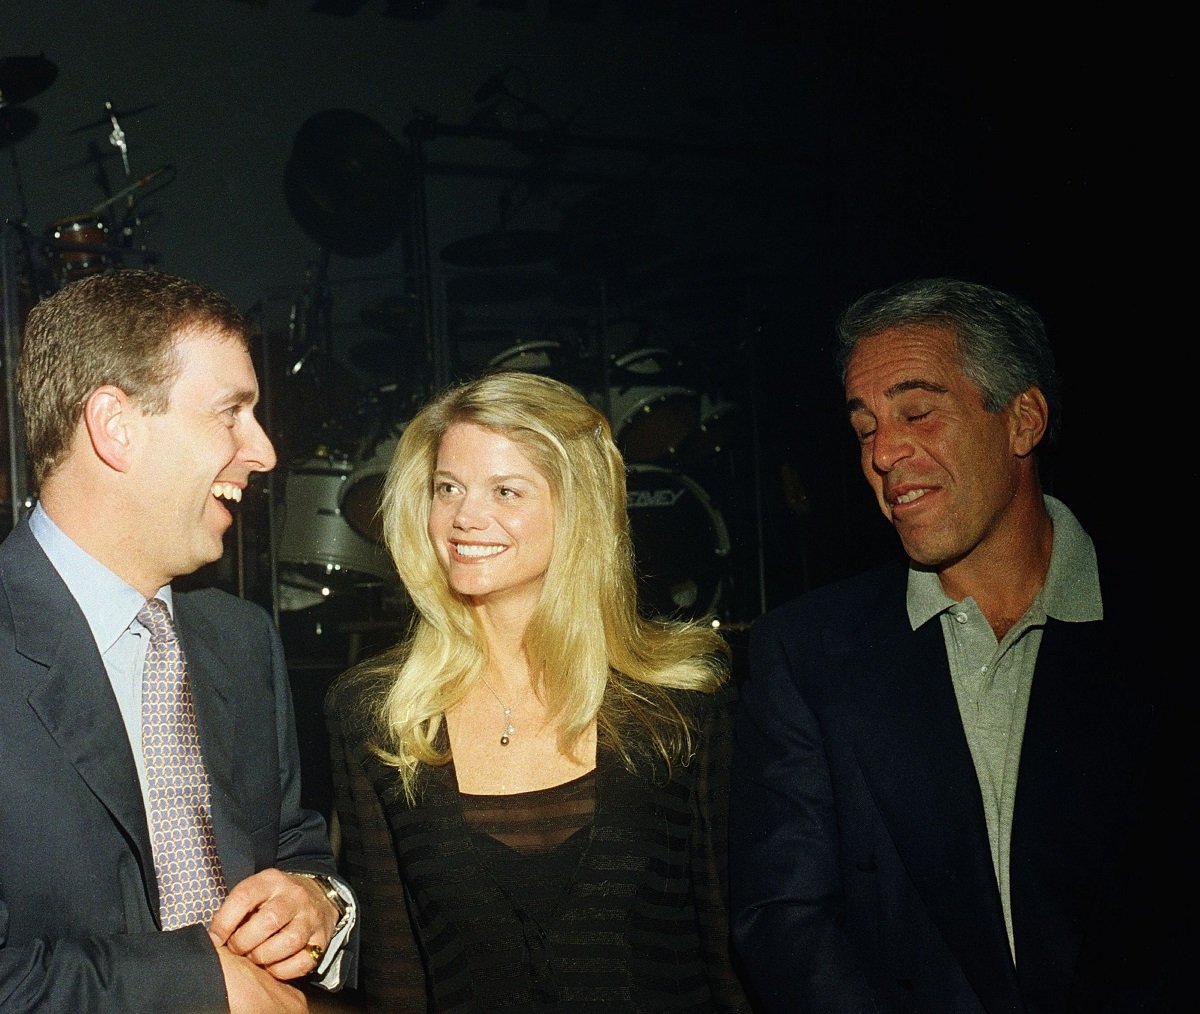 Prince Andrew, Gwendolyn Beck, and Jeffrey Epstein chatting and laughing during a party at the Mar-a-Lago club